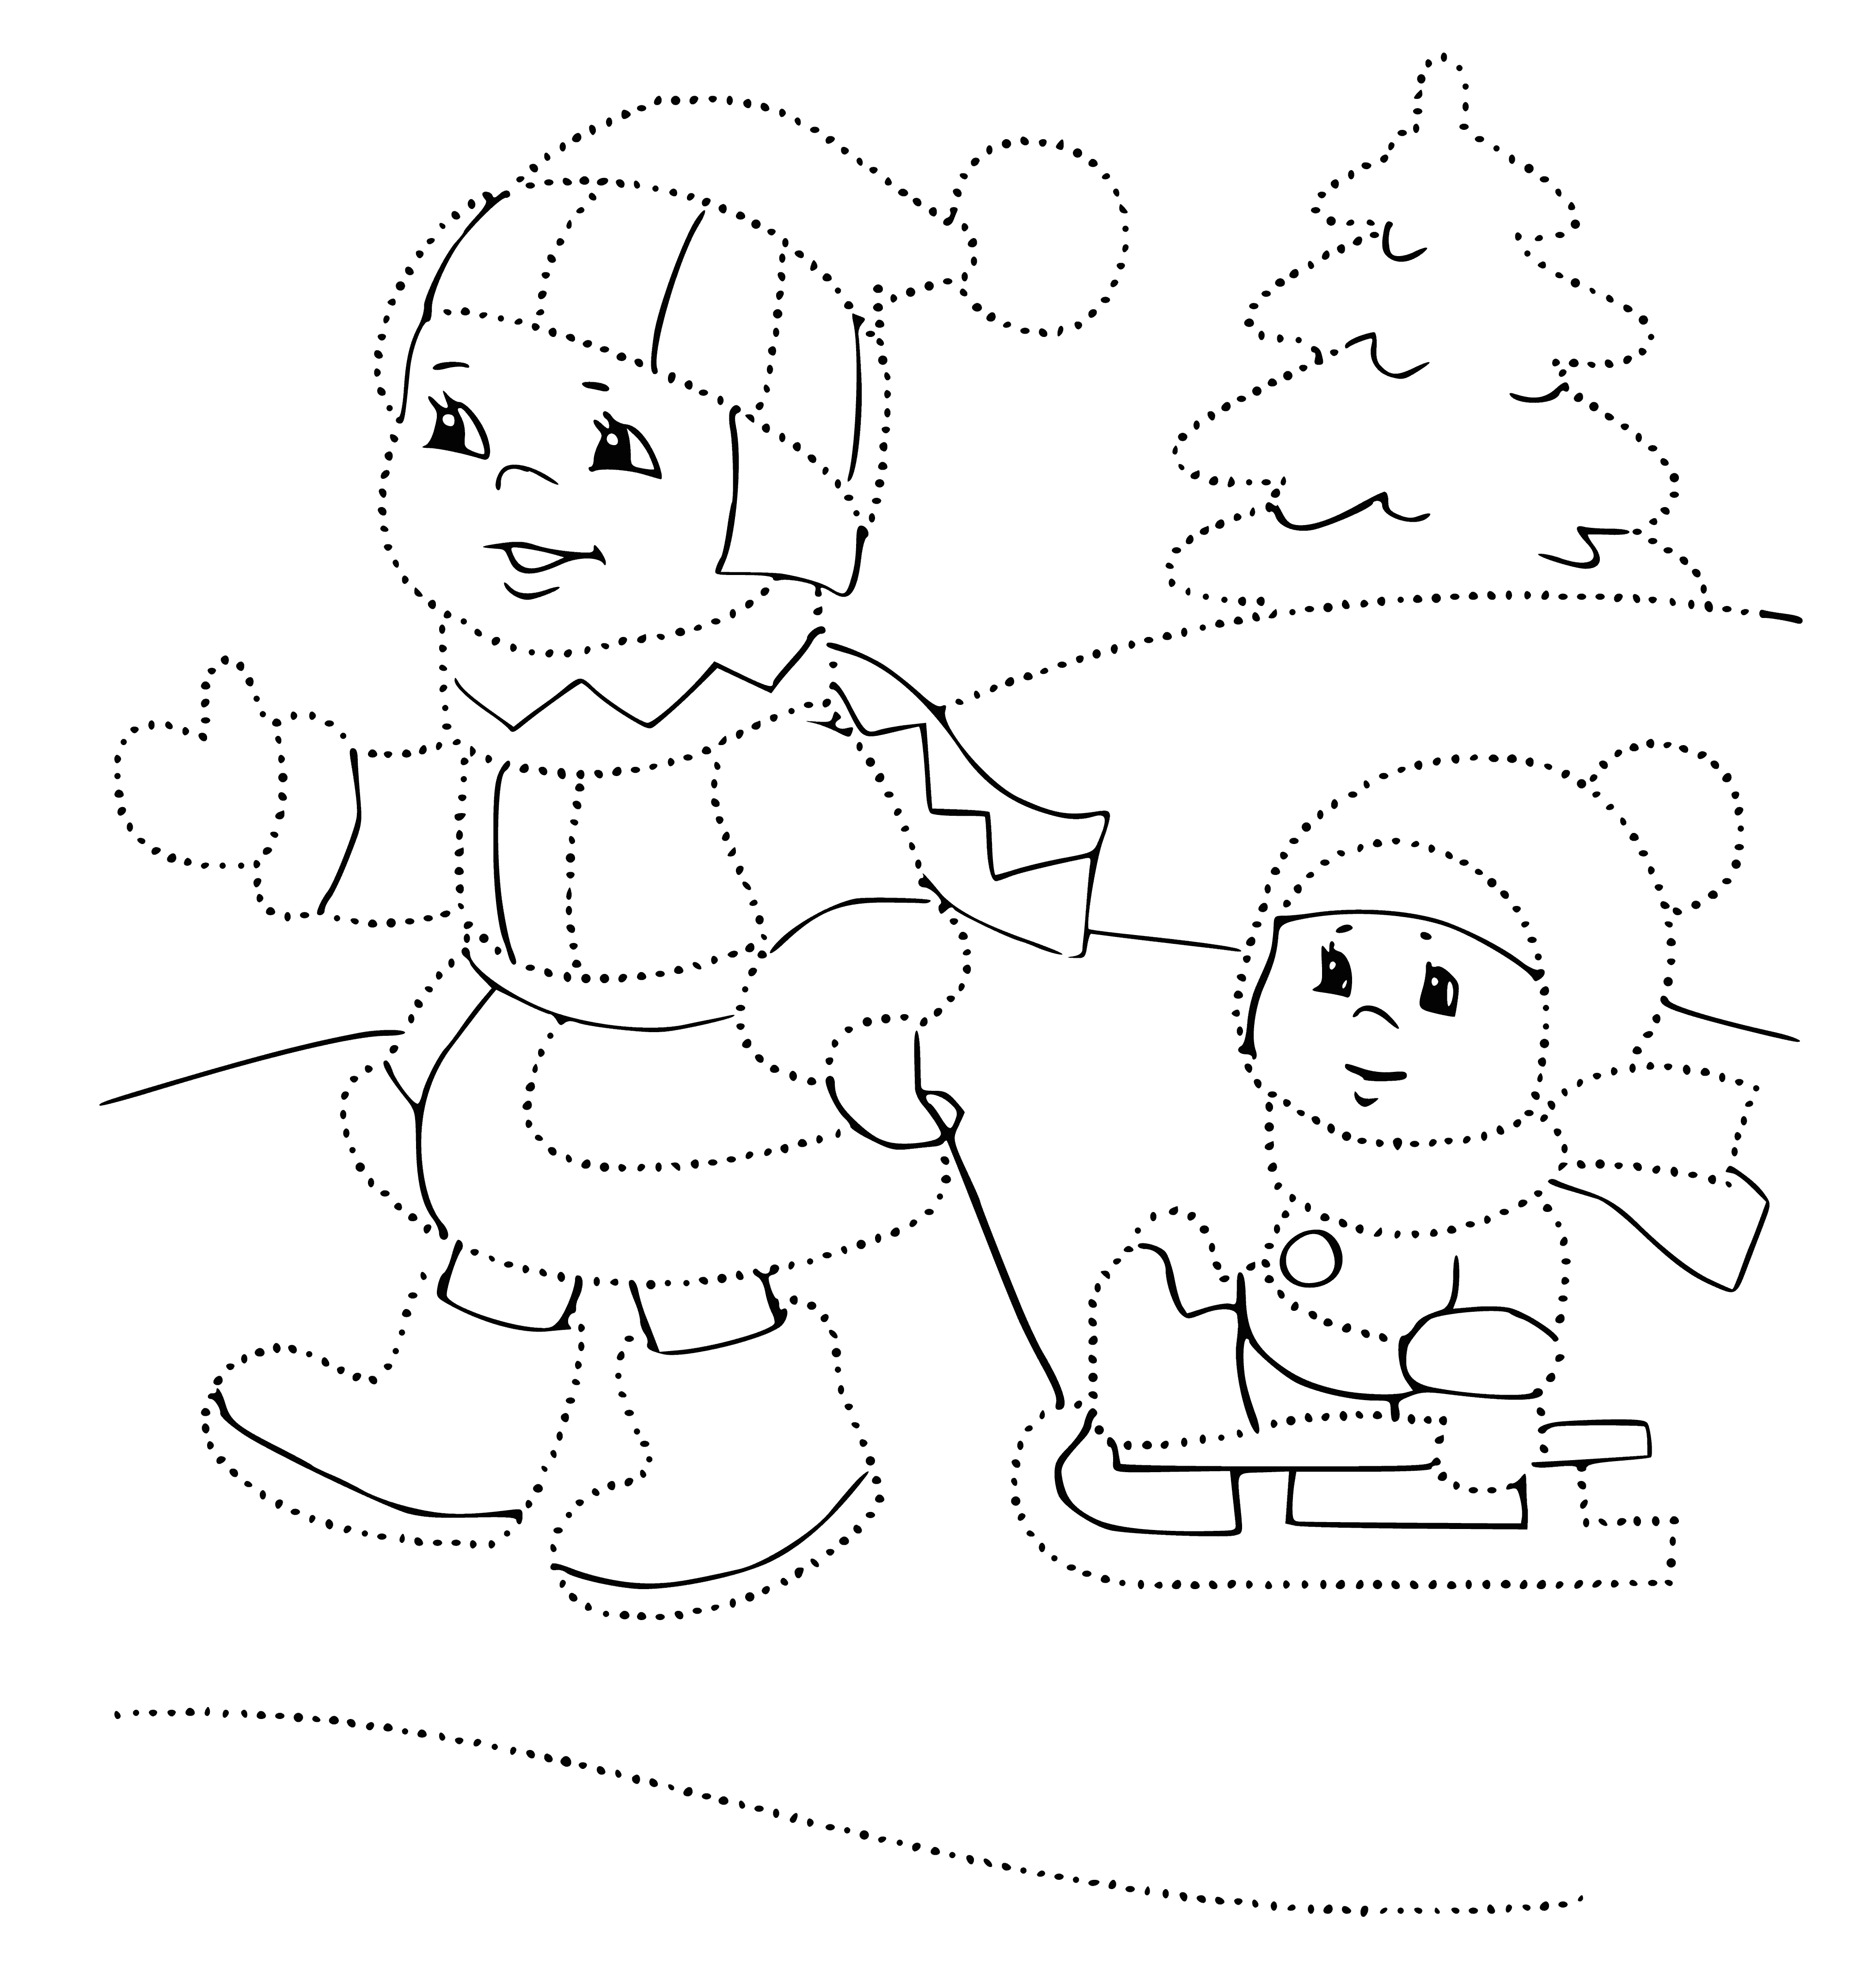 coloring page: Girl & boy sledding down hill, girl in purple, boy in green w/ red hats.